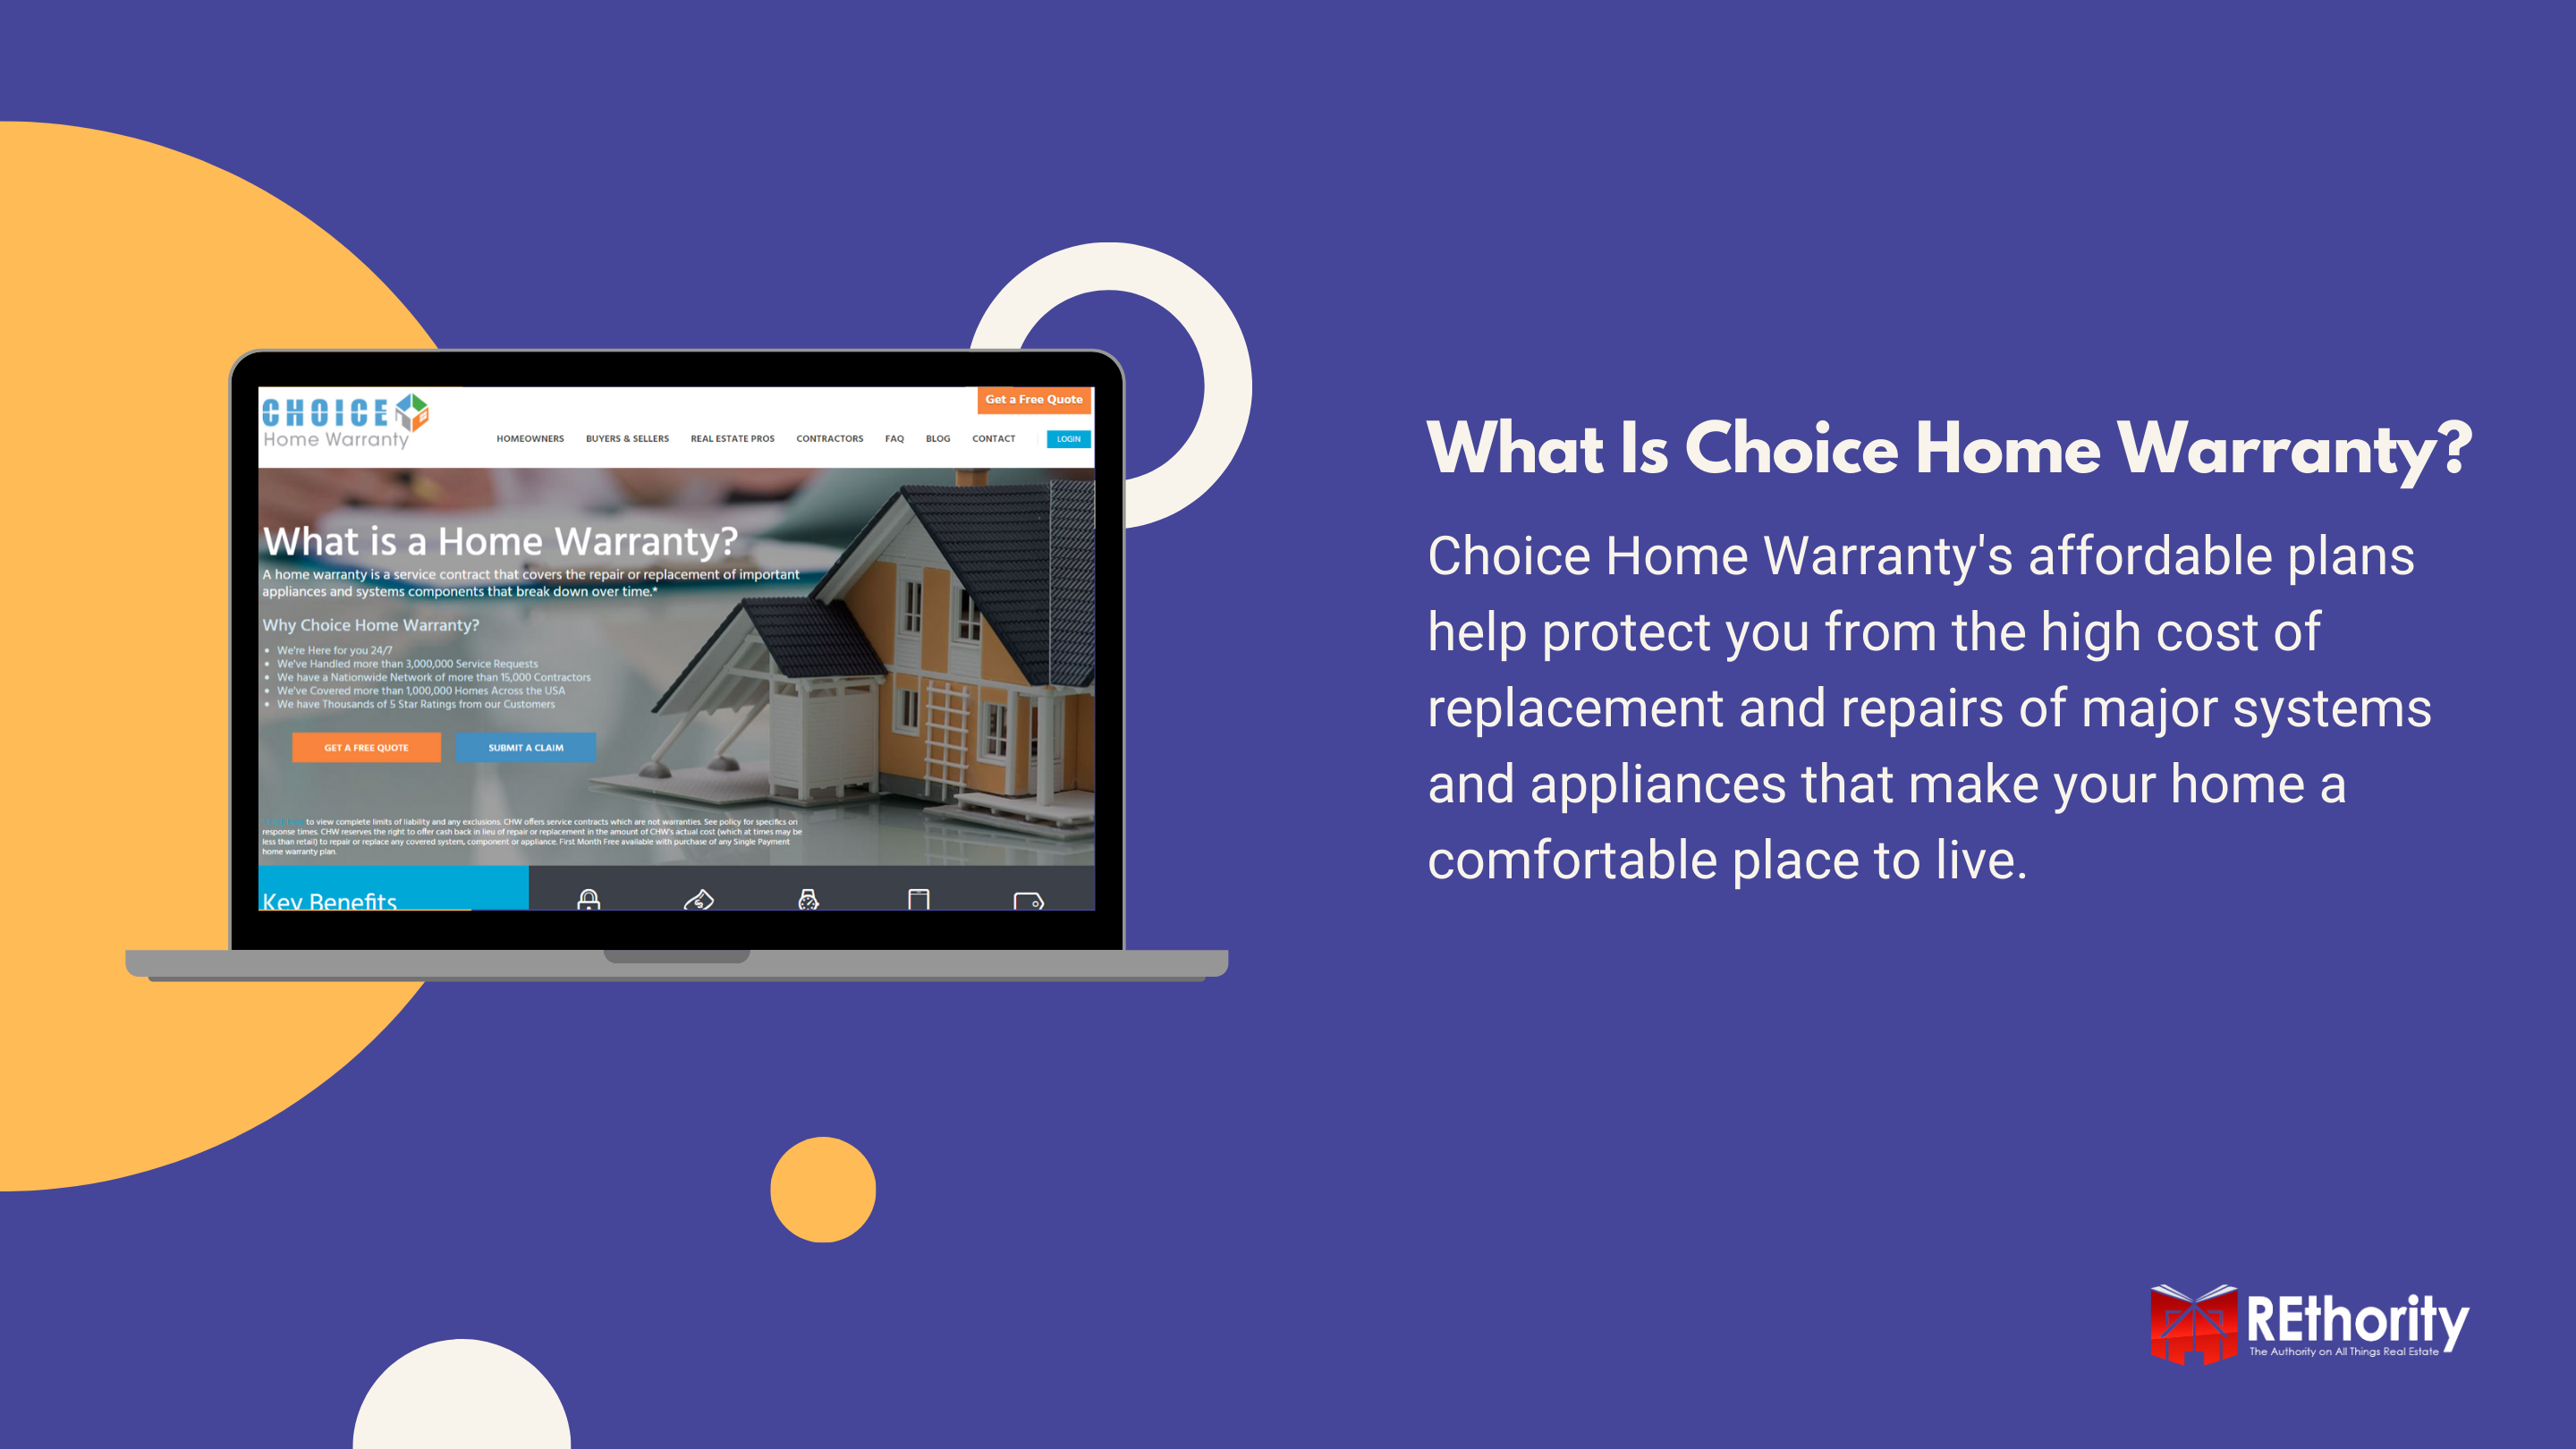 What Is Choice Home Warranty with a copy of the home site on a laptop screen